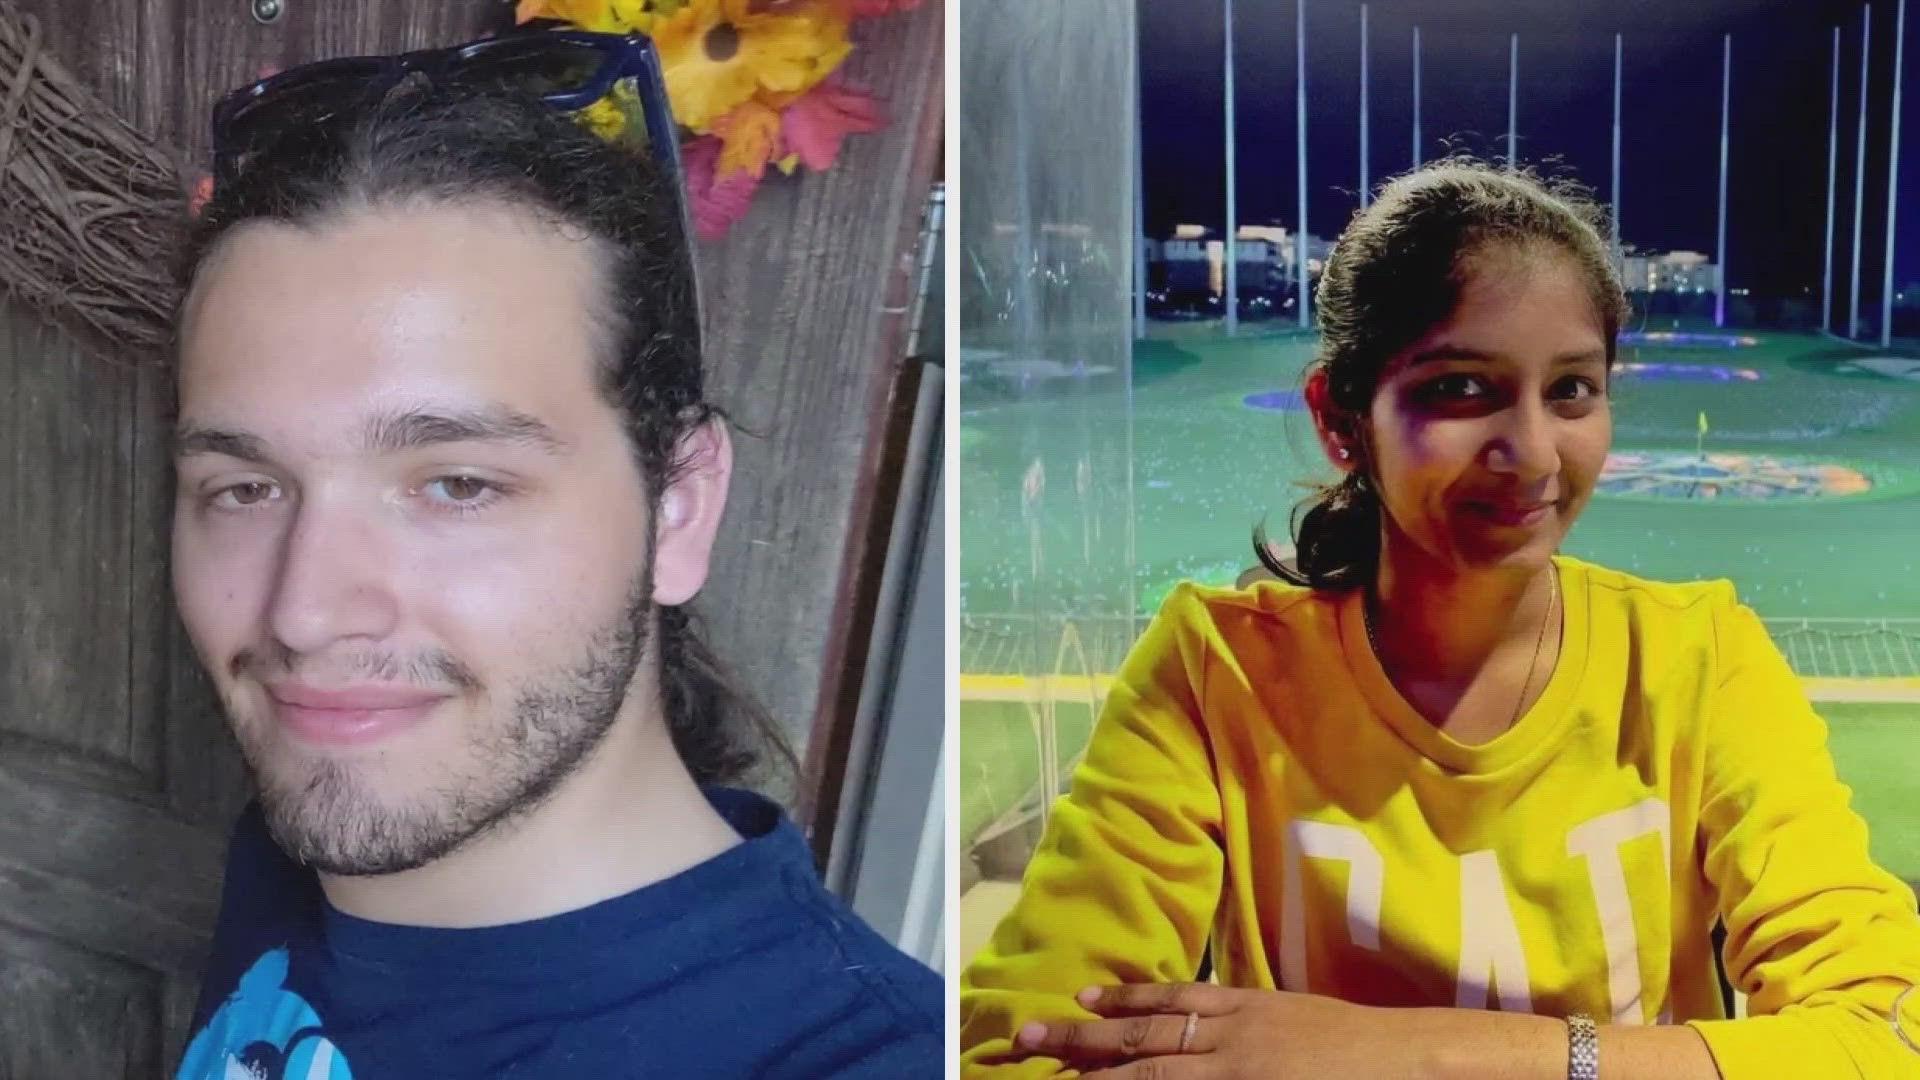 Christian LaCour and Aishwarya Thatikonda have been identified as two of the victims in the Allen outlet mall shooting.